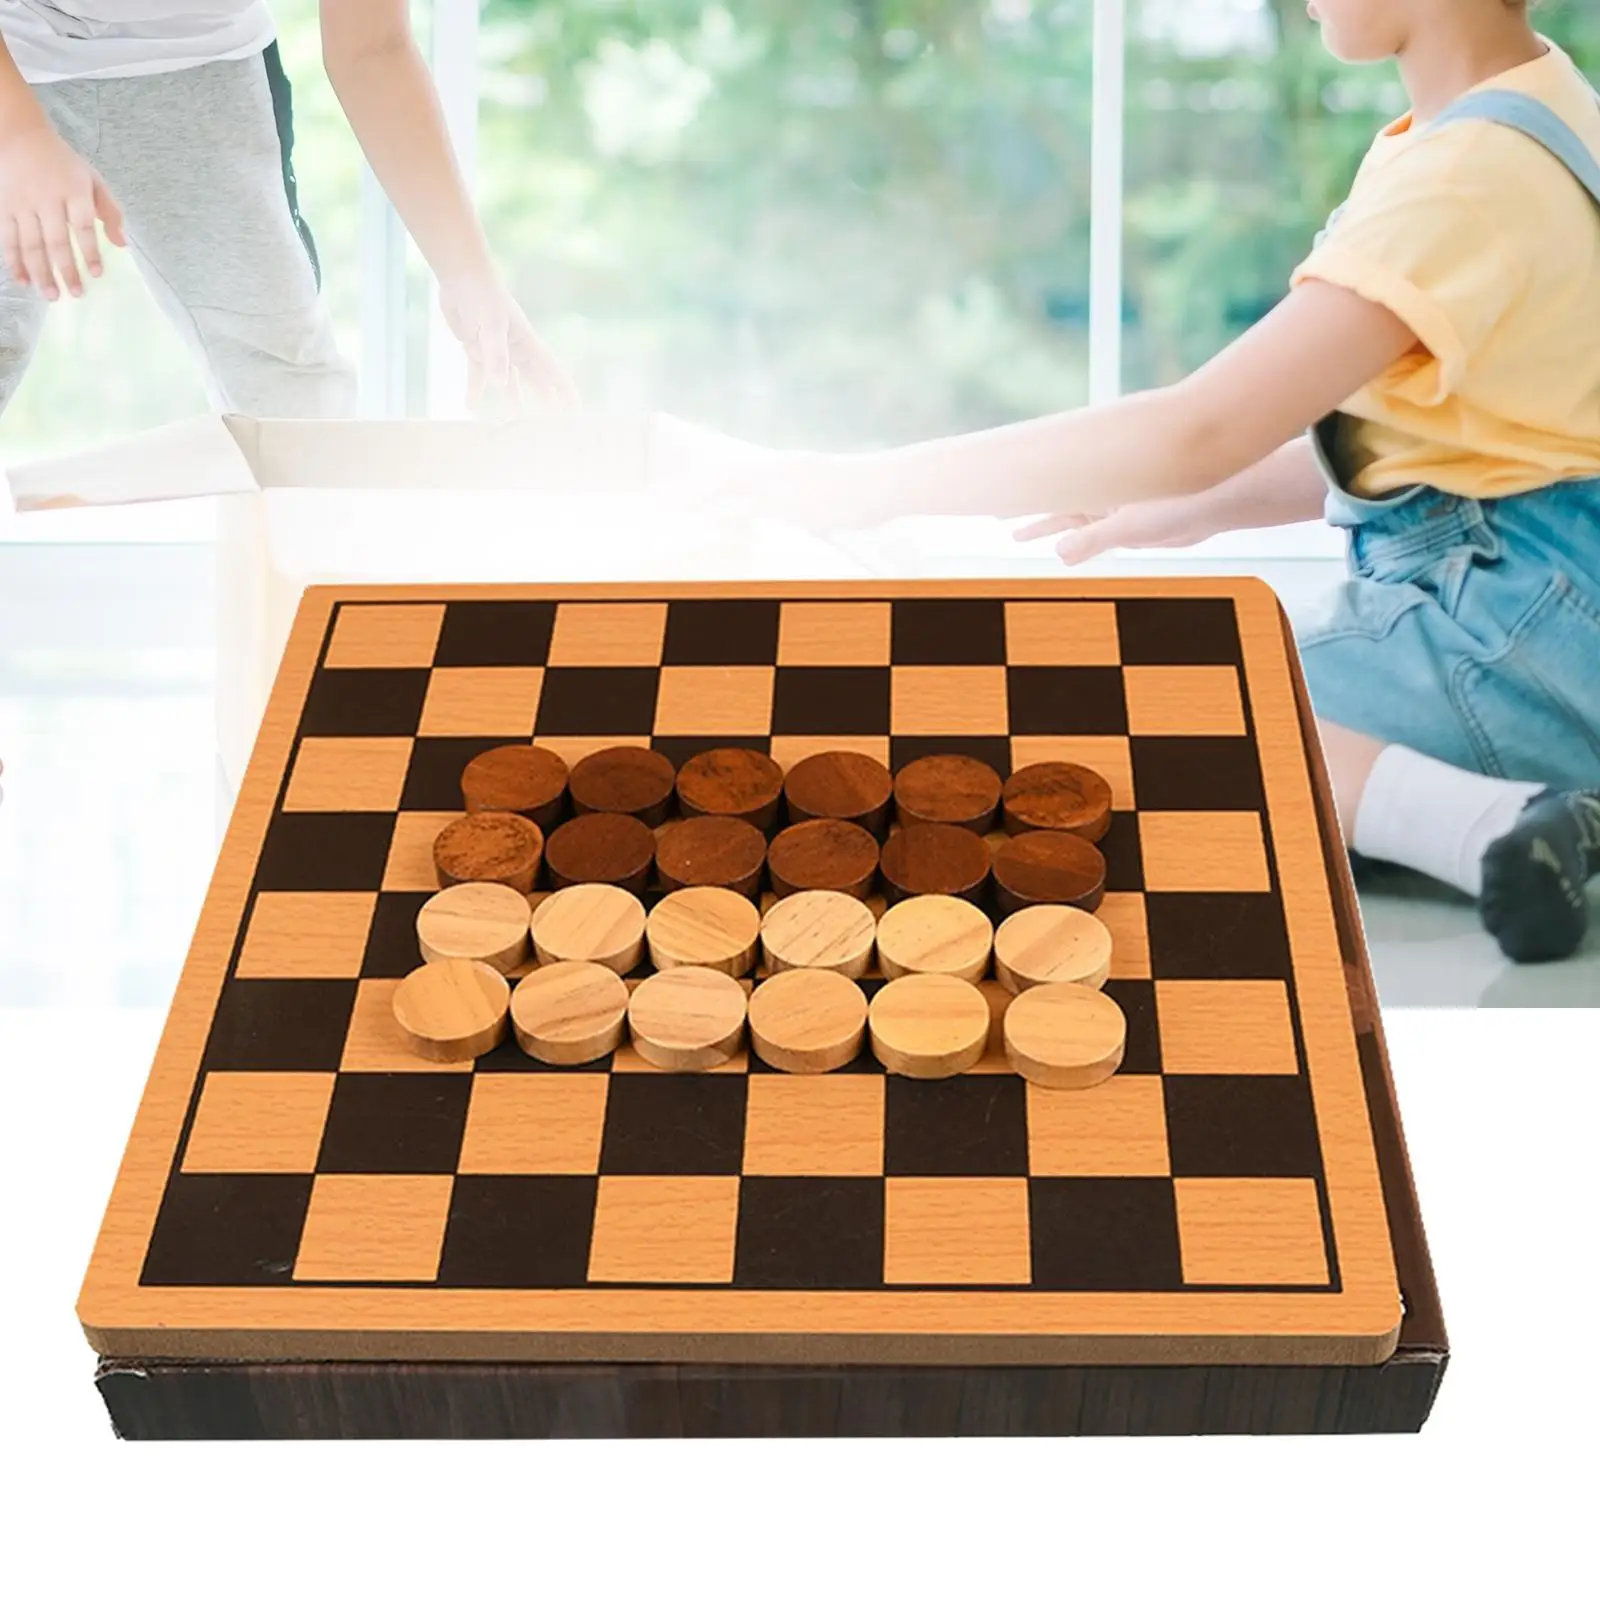 Chess Game Set Decorative Retro Style Early Education Toys Hand Carved Piece for Boys Girls Children Centerpieces Tabletop